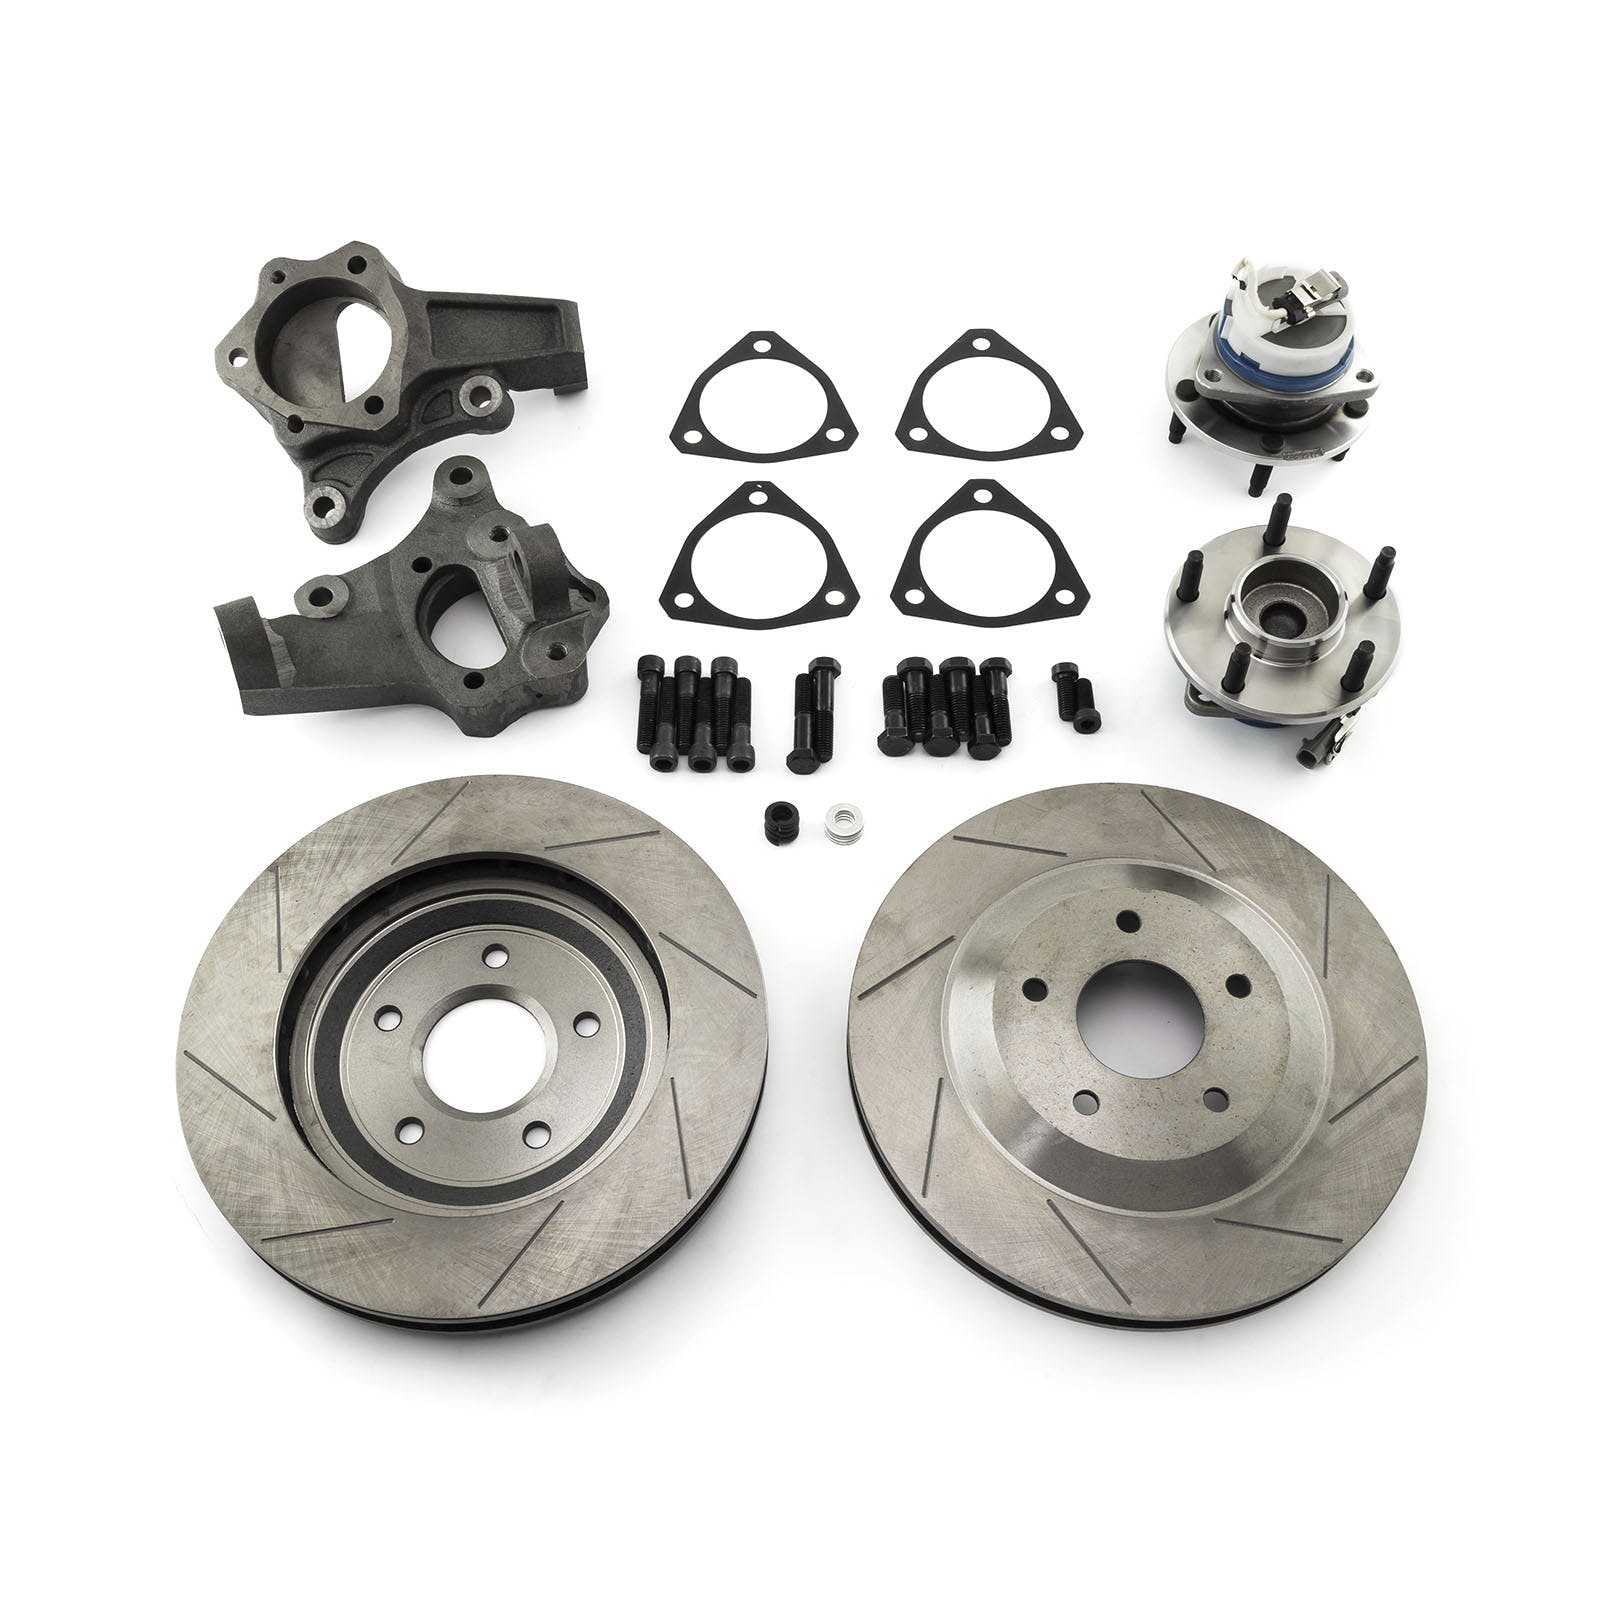 Speedmaster PCE164.1011 13 Drilled Slotted Front Disc Brake Conversion Kit - Calipers Not Included